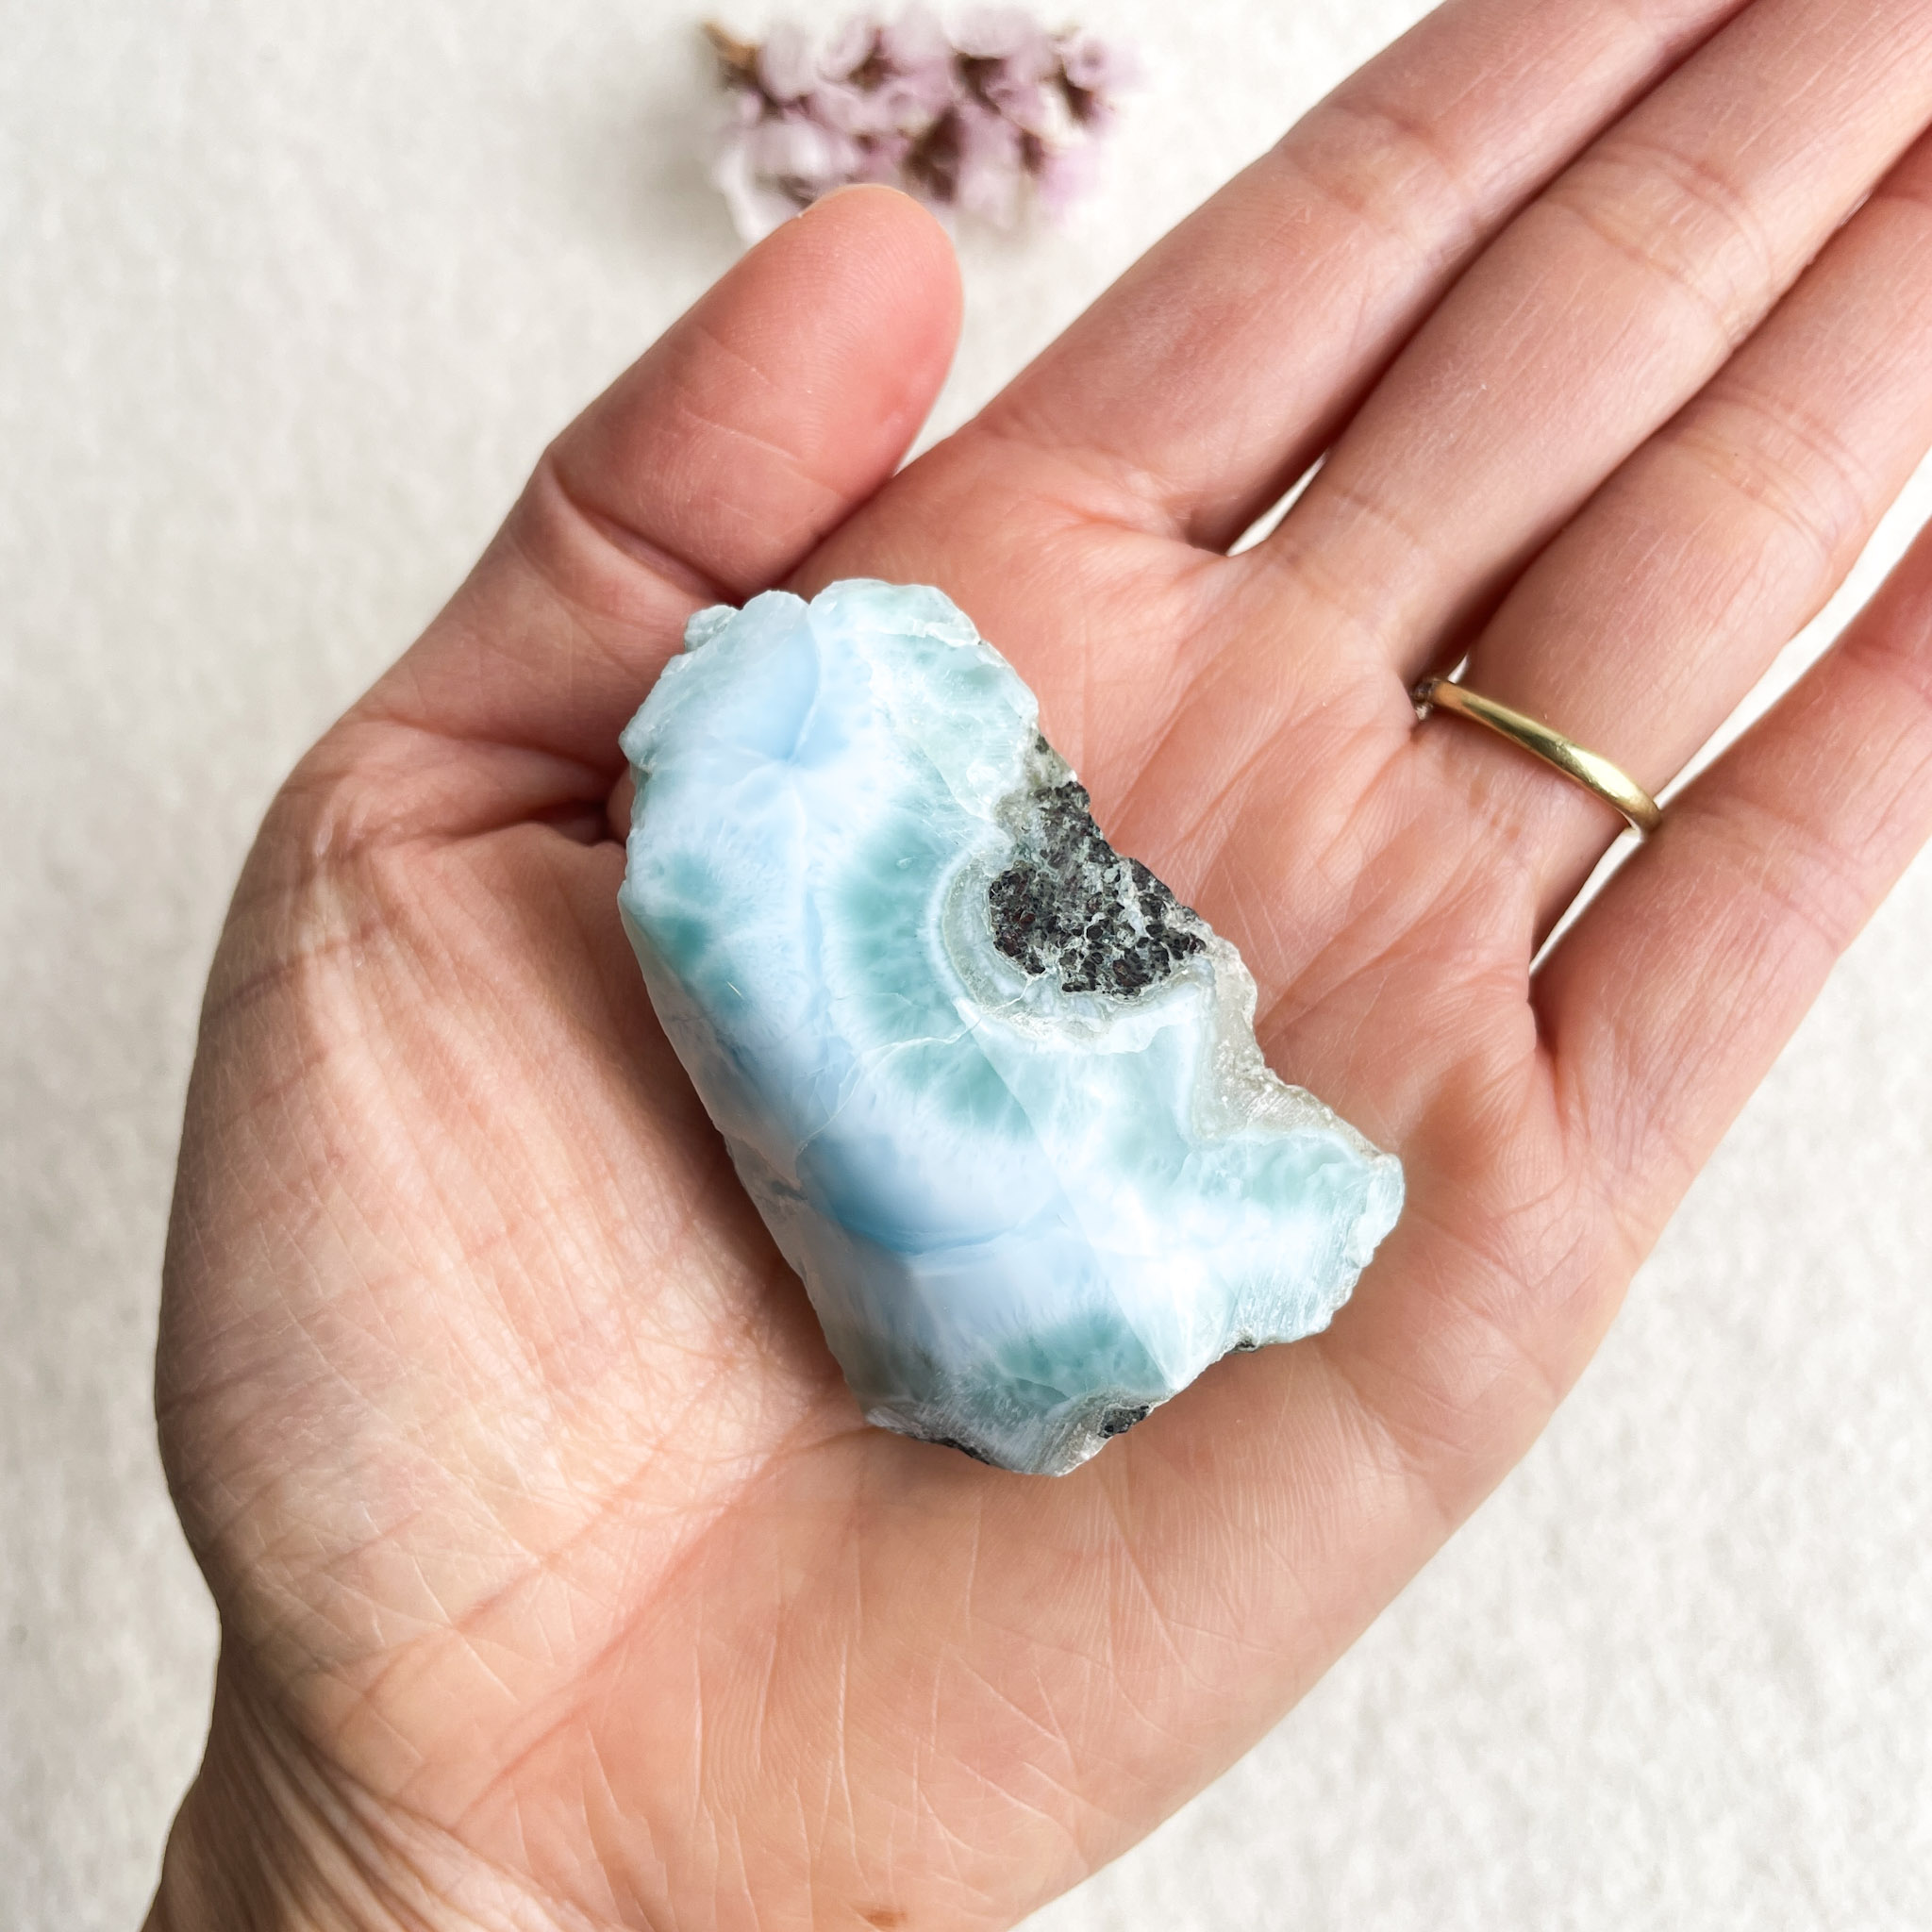 A person's open hand displaying a translucent blue larimar stone with patches of white and gray, with a blurred background of small purple flowers and a light surface.